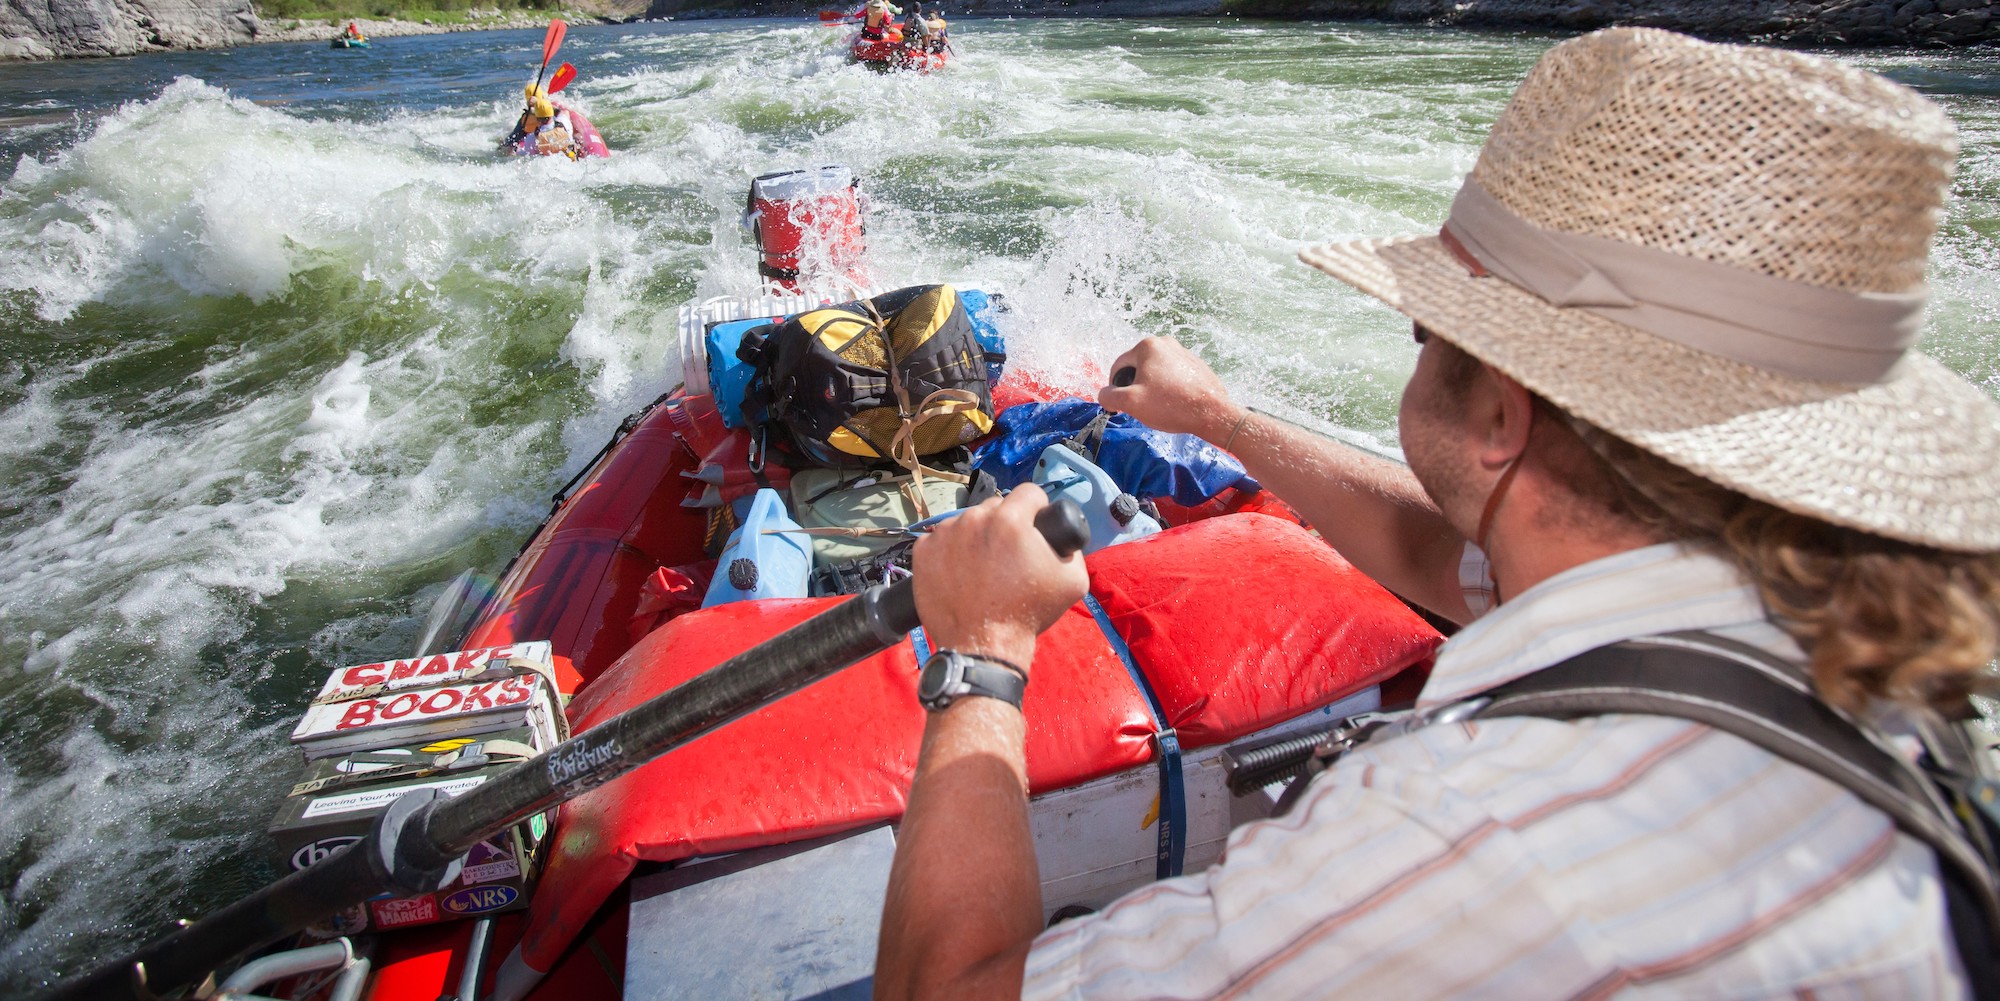 River guide rowing a boat full of gear through a rapid on the Snake River through Hells Canyon